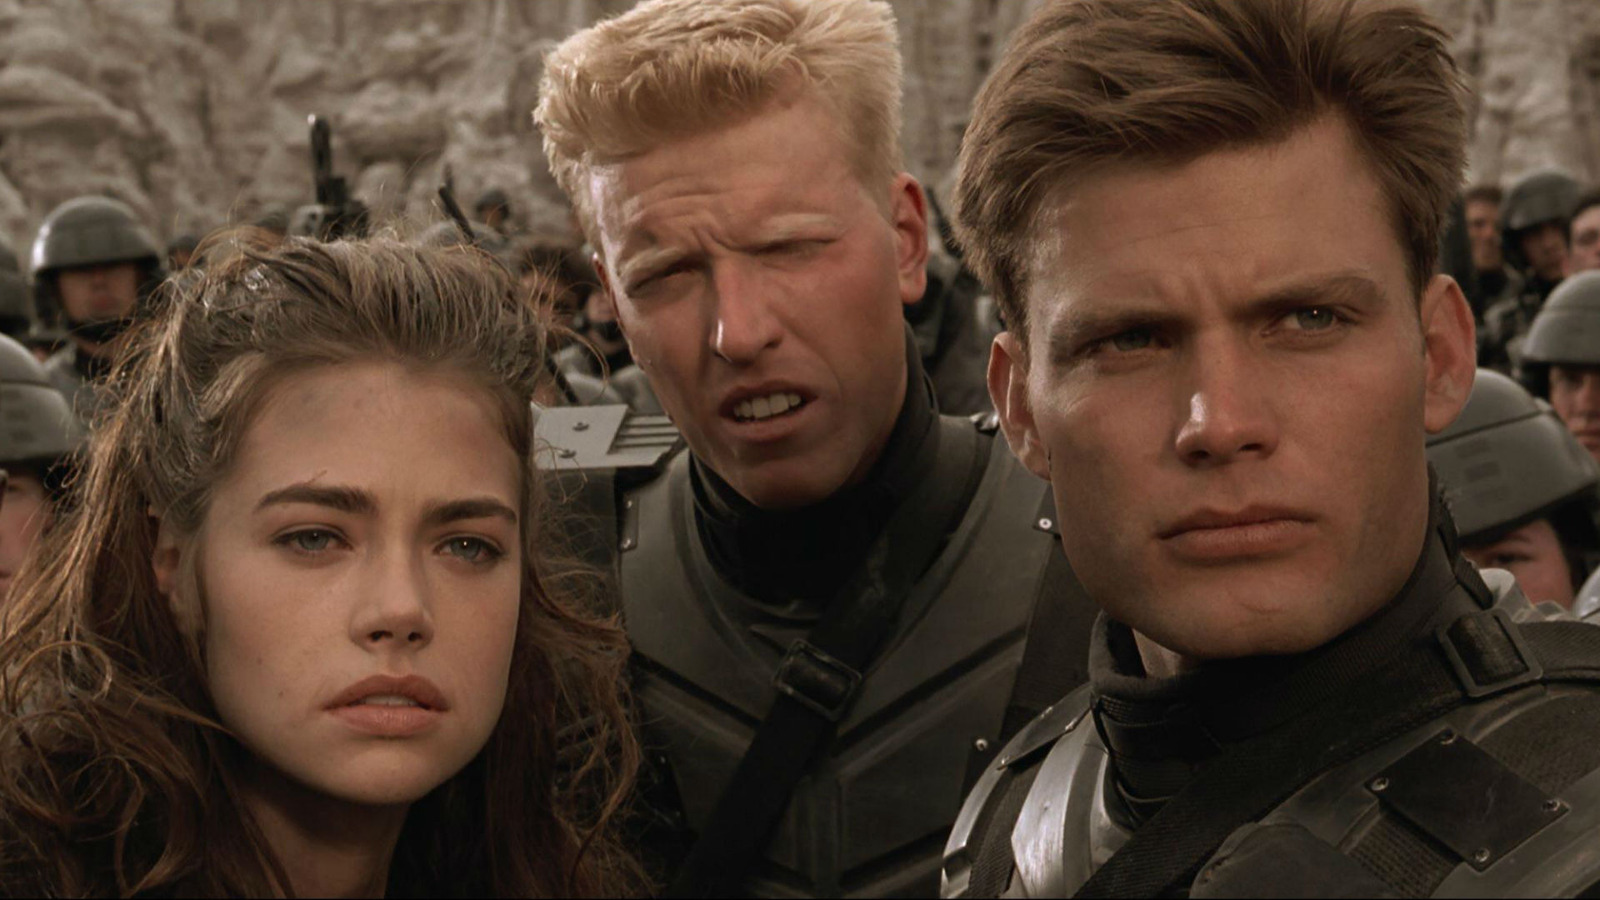 Paul Verhoeven Set The Tone For Starship Troopers By Stripping Down In Front Of The Cast 